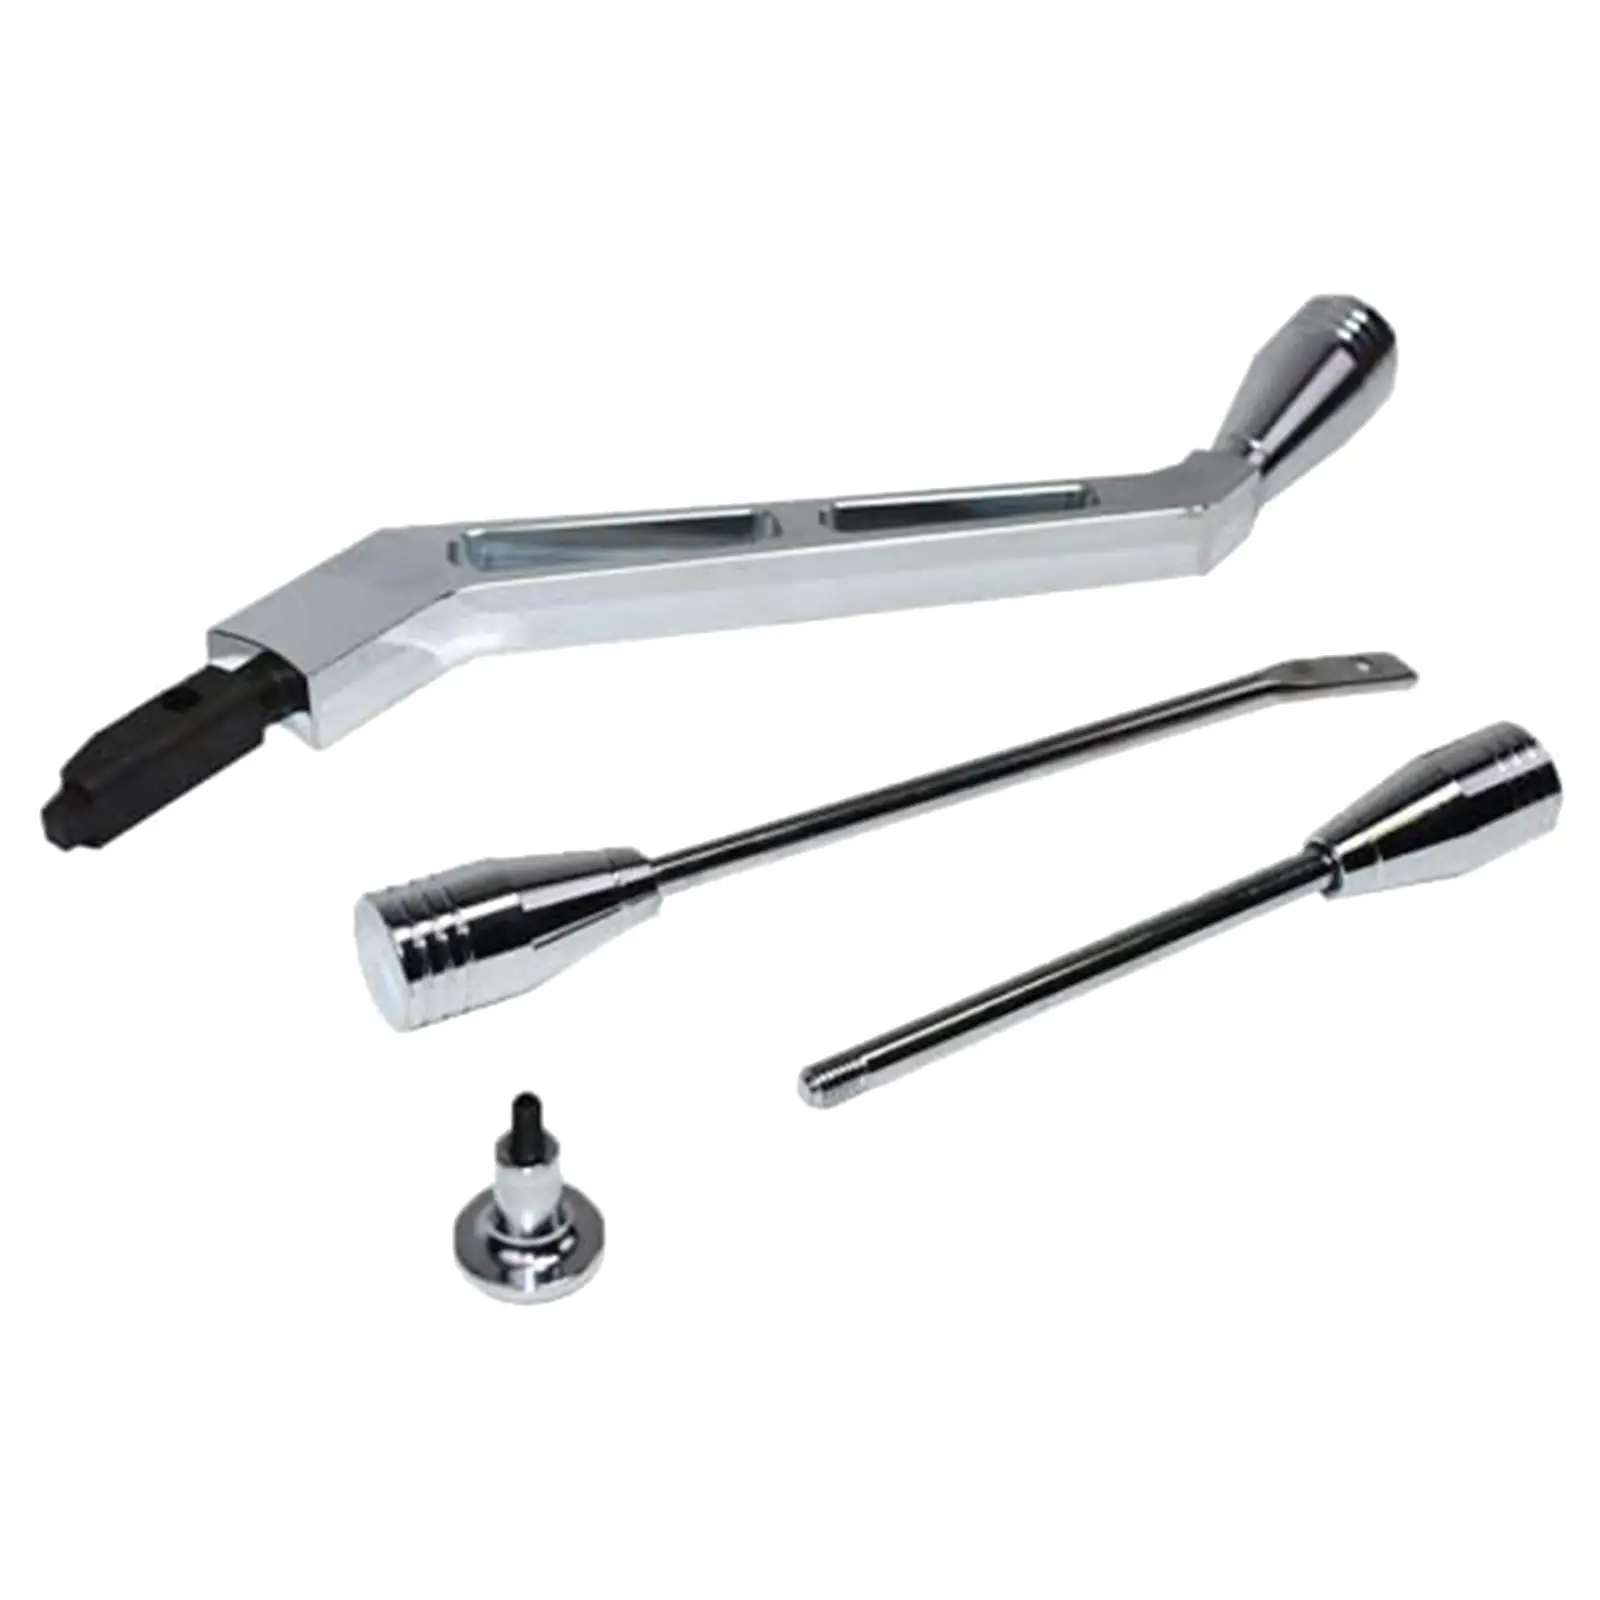 

Shifter Turn Signal Lever Hazard Tilt Kit Replaces Spare Parts High Performance Durable Polished for GM Columns 1967-1994